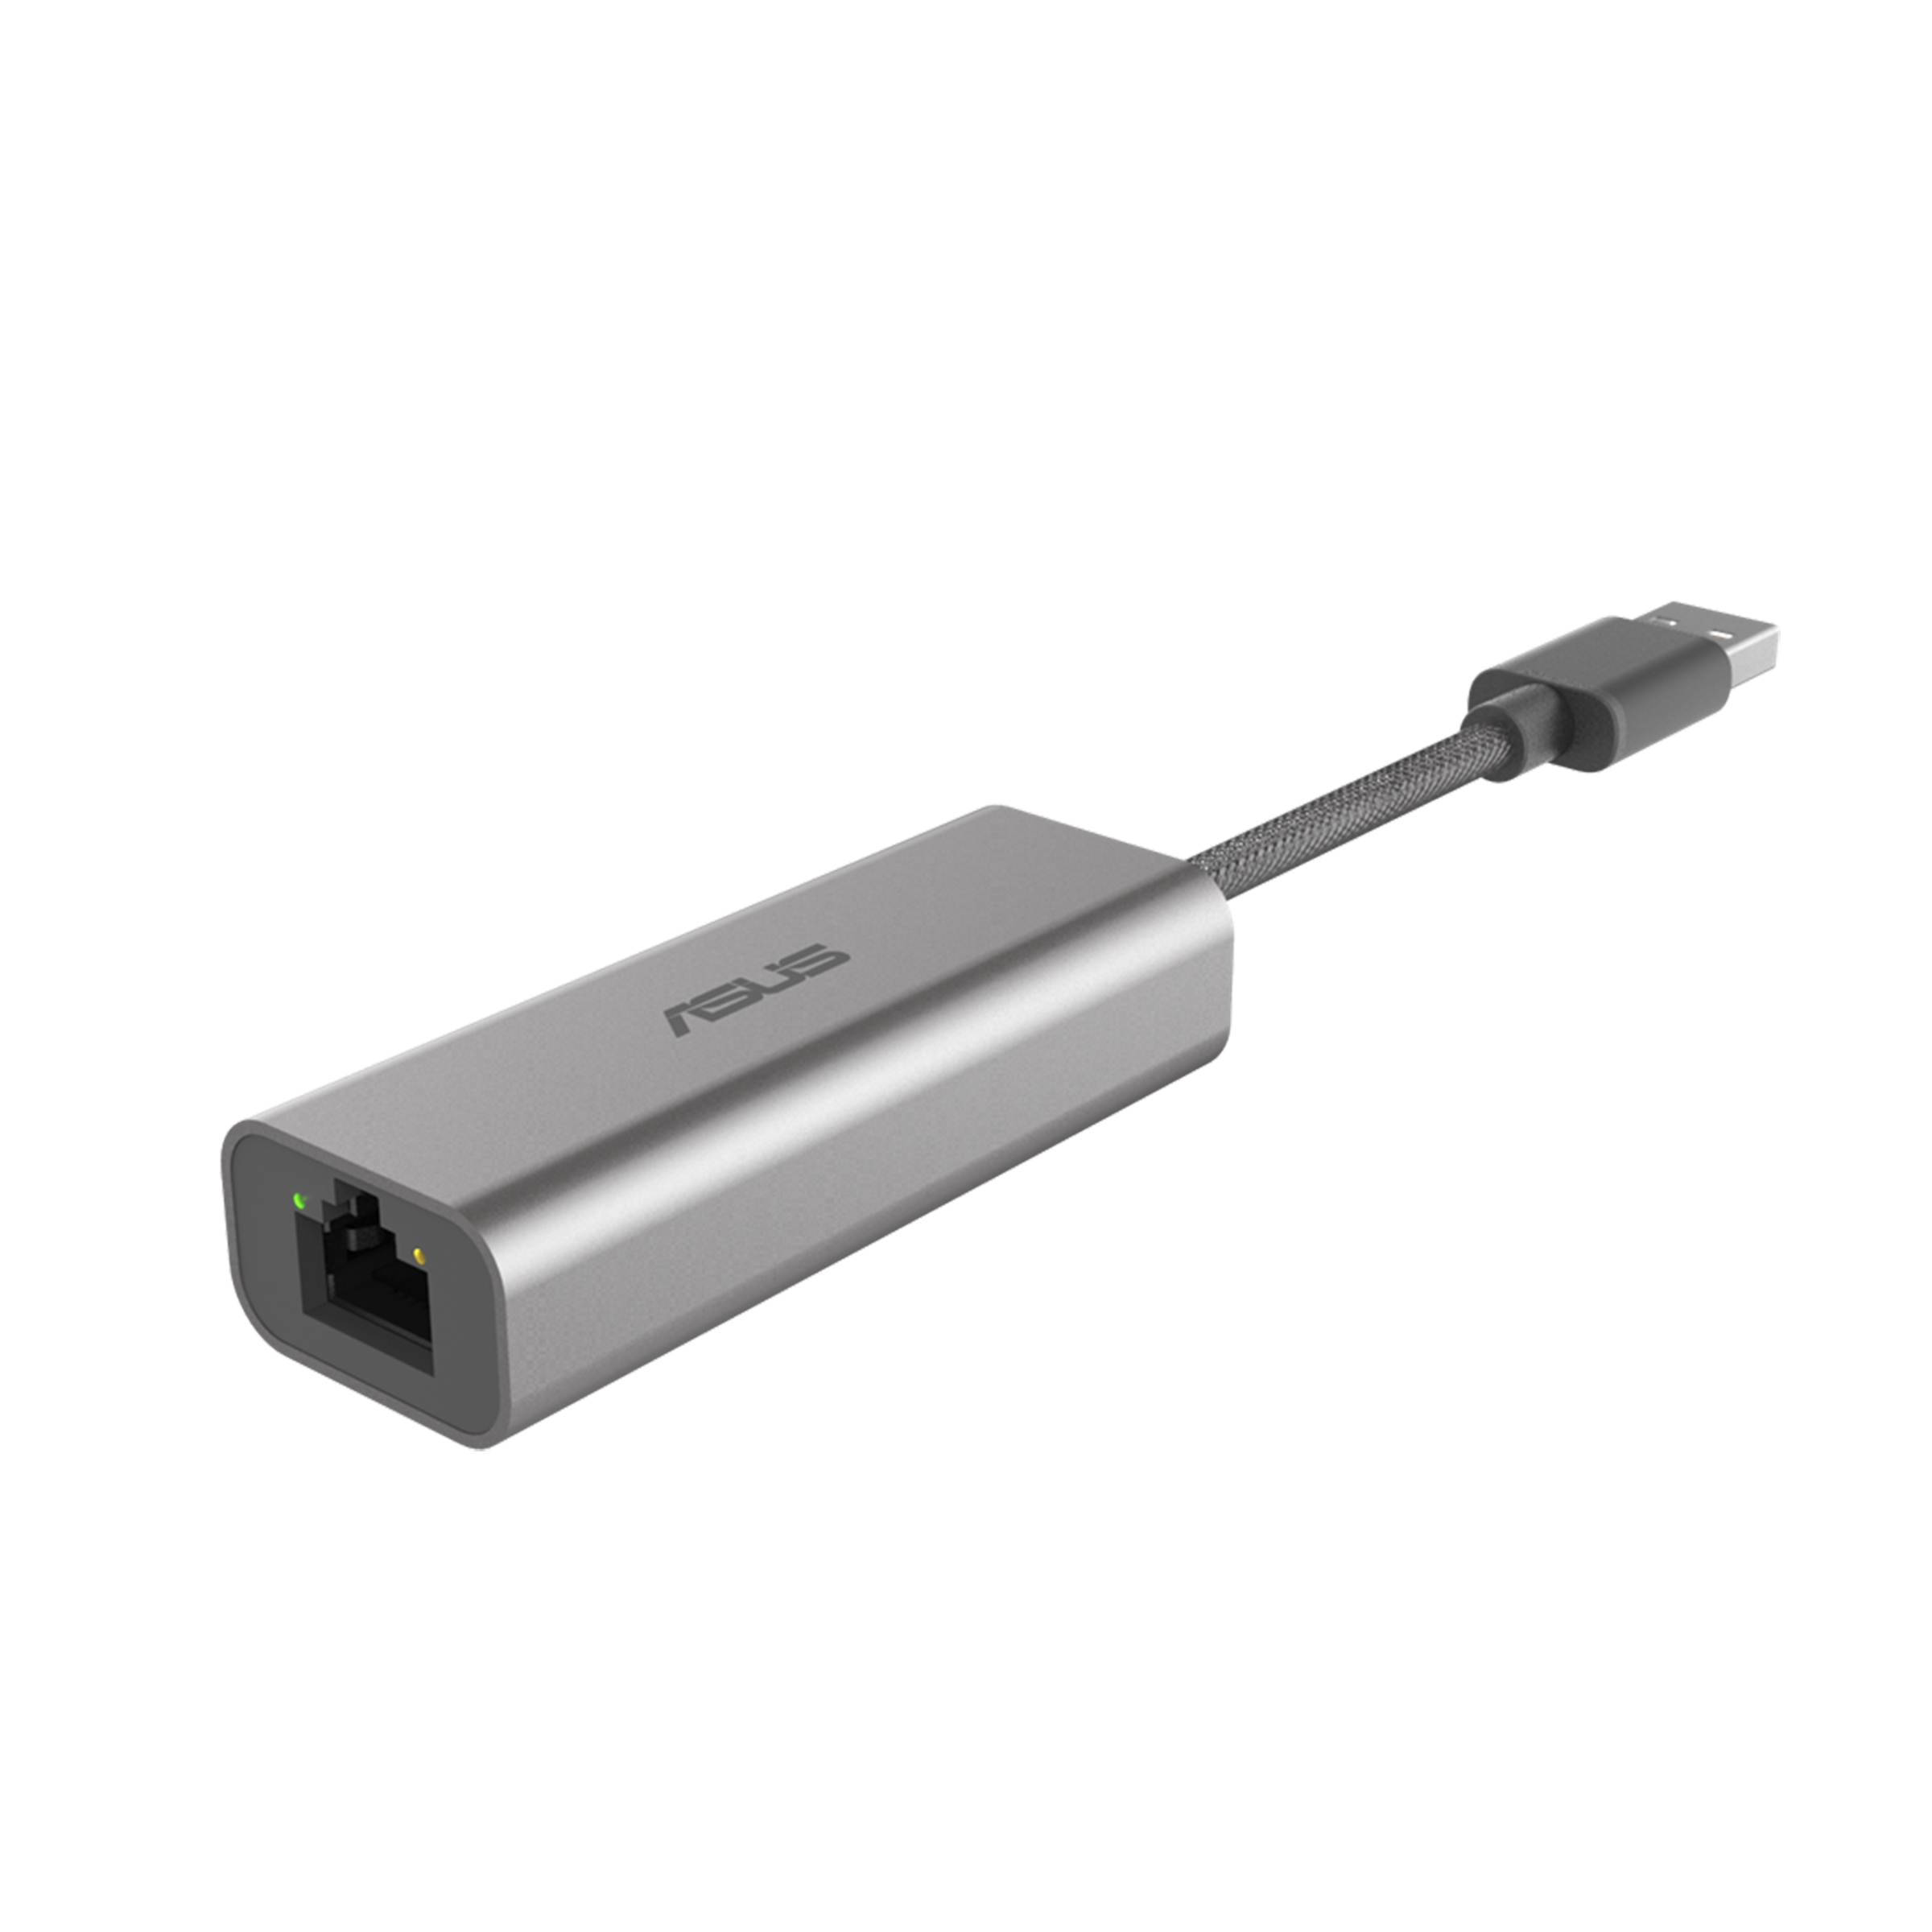 USB-C2500｜Wired Networking｜ASUS Global